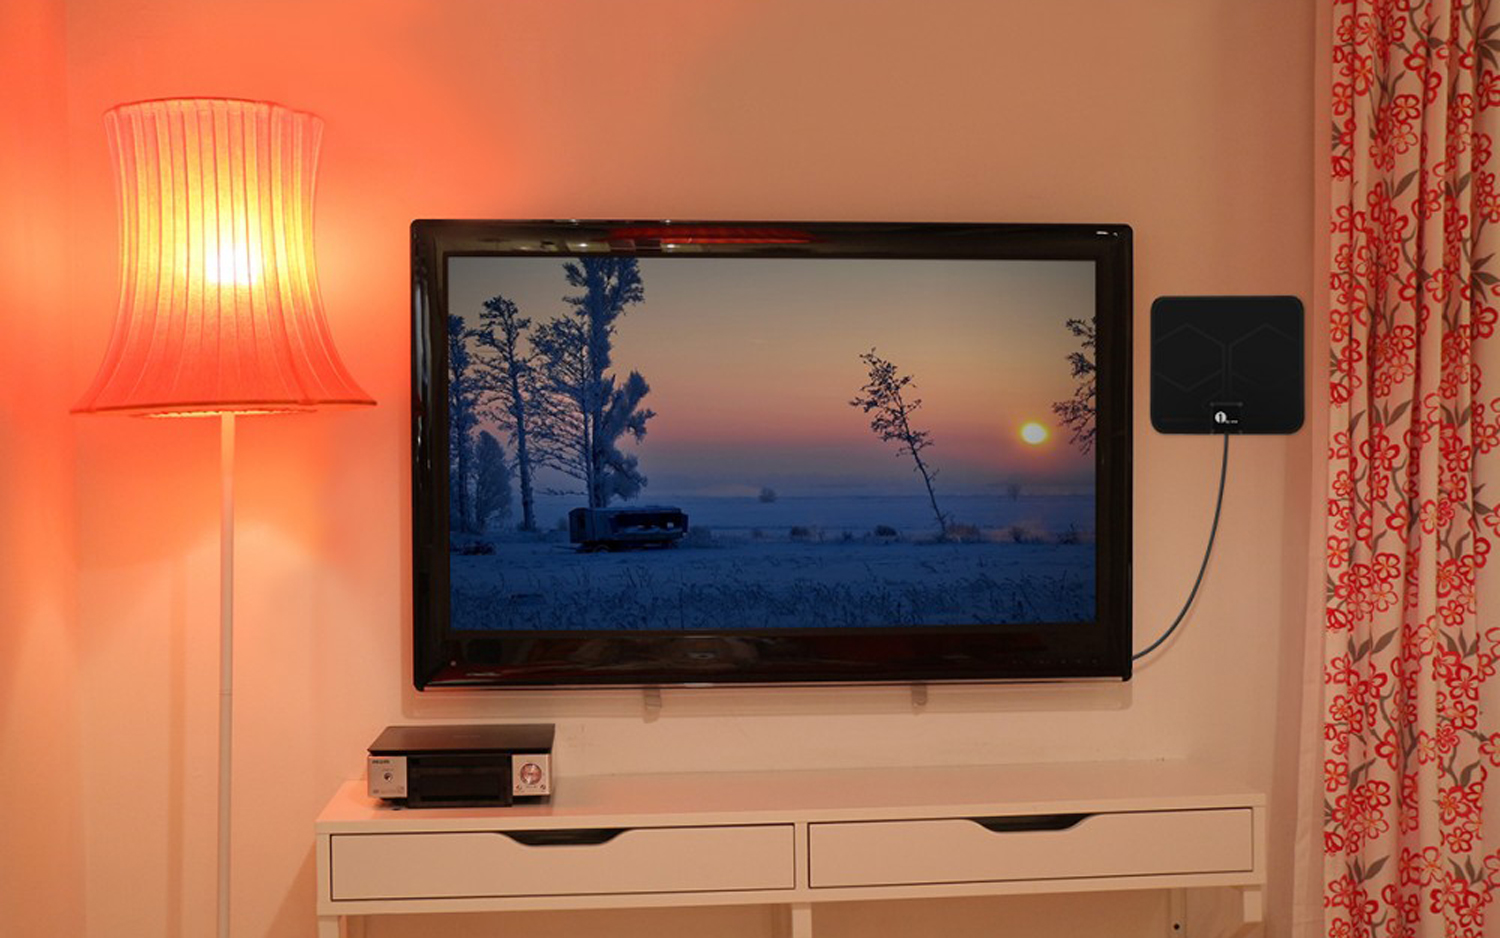 The 1byone digital antenna hooked up to a TV.